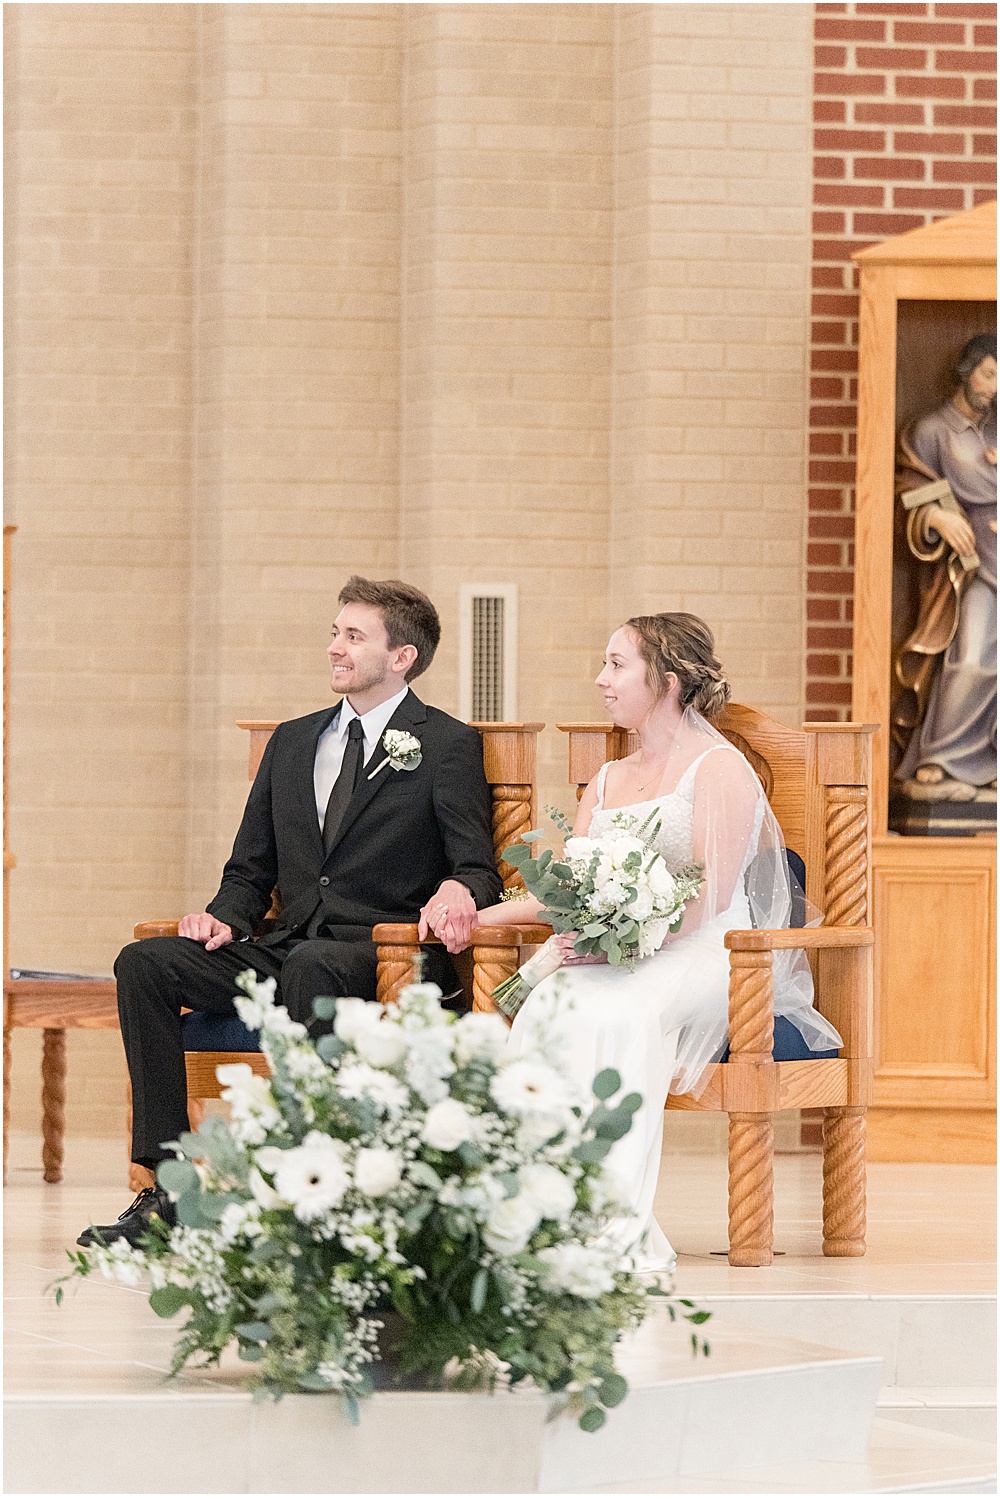 Bride and groom sitting and smiling during St. Maria Goretti Catholic Church wedding ceremony in Westfield, Indiana